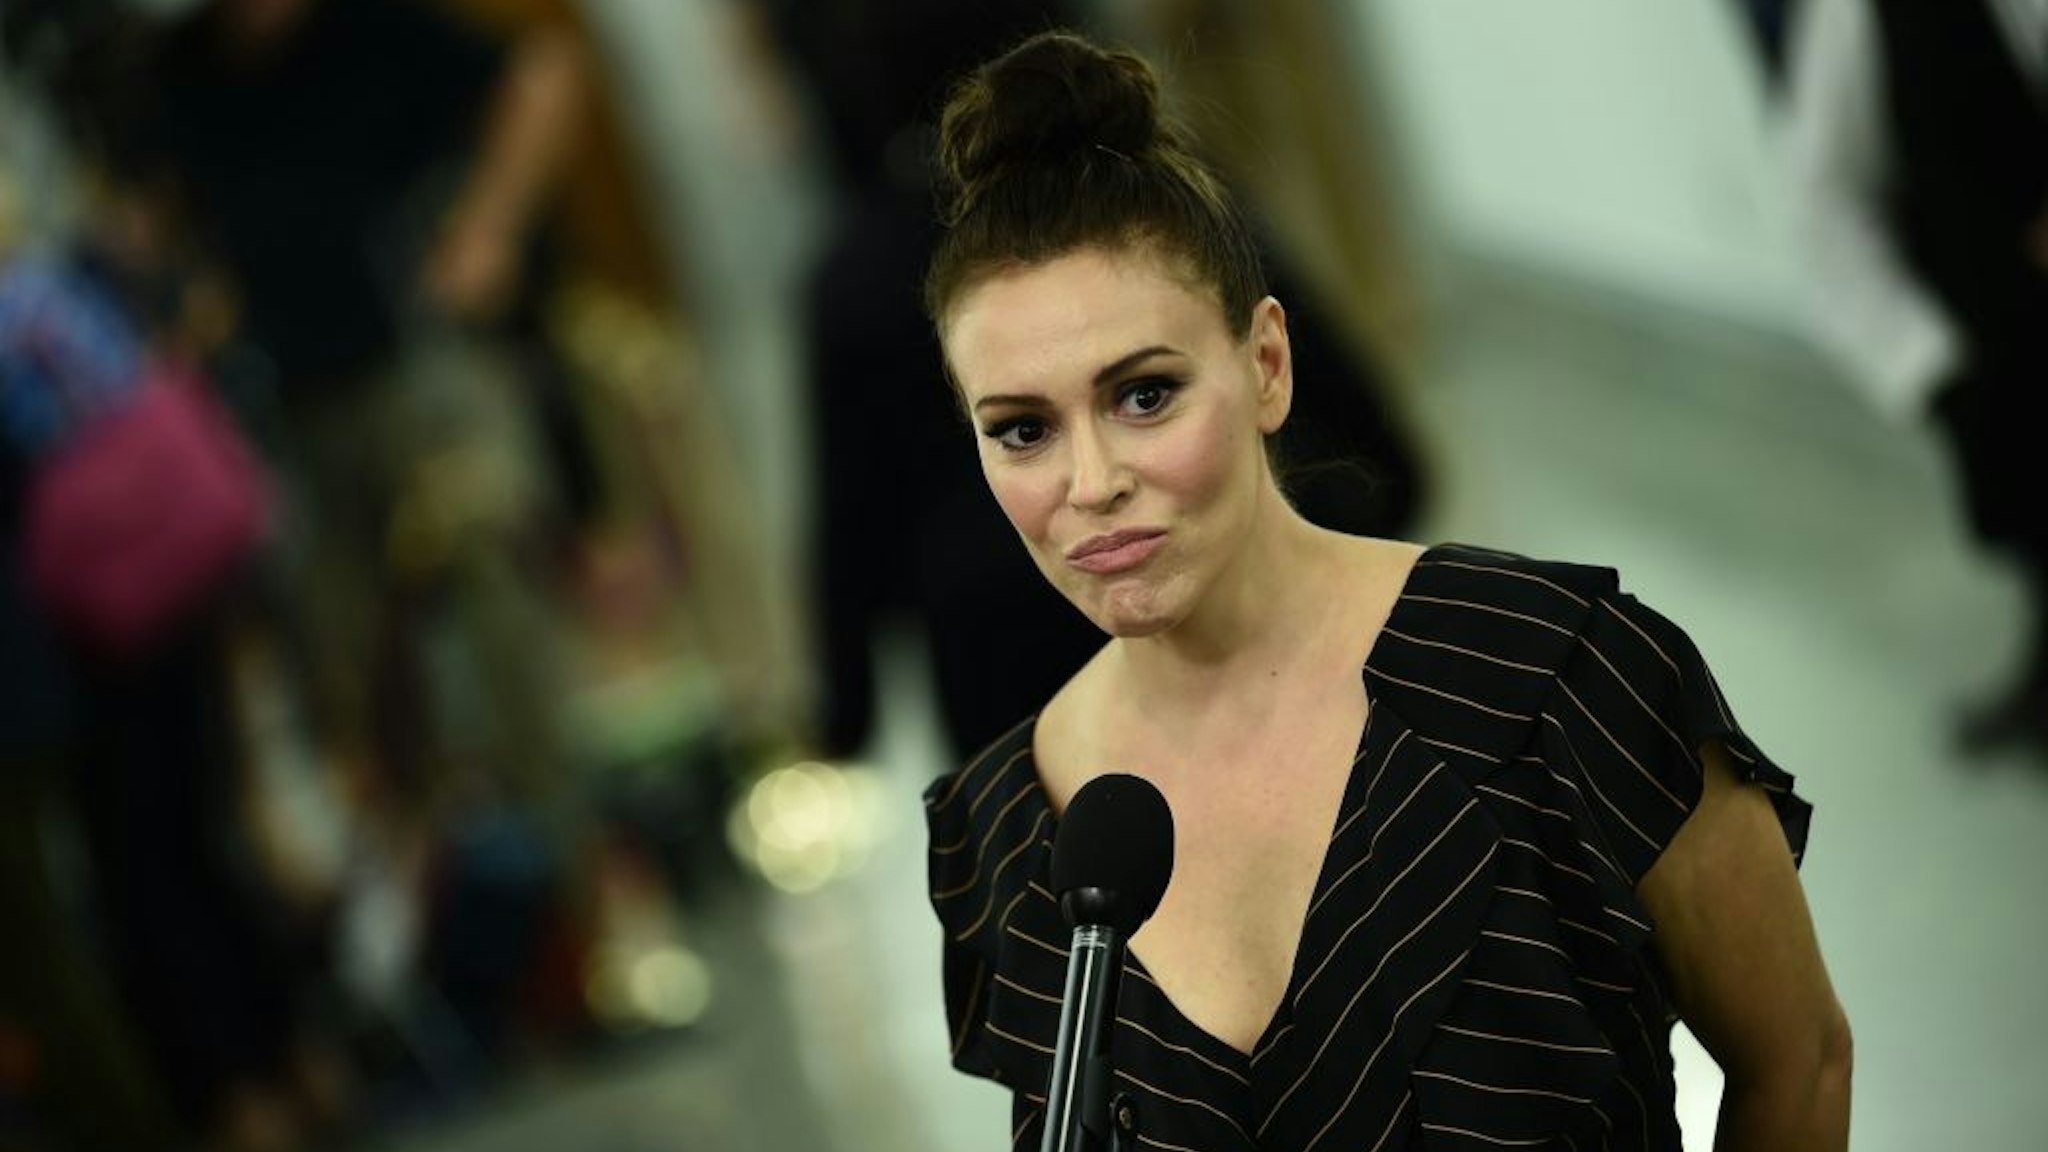 Actress and sexual assault survivor Alyssa Milano speaks to the media during the Senate Judiciary Committee hearing on the nomination of US Supreme Court nominee Brett Kavanaugh on Capitol Hill in Washington, DC, on September 27, 2018.